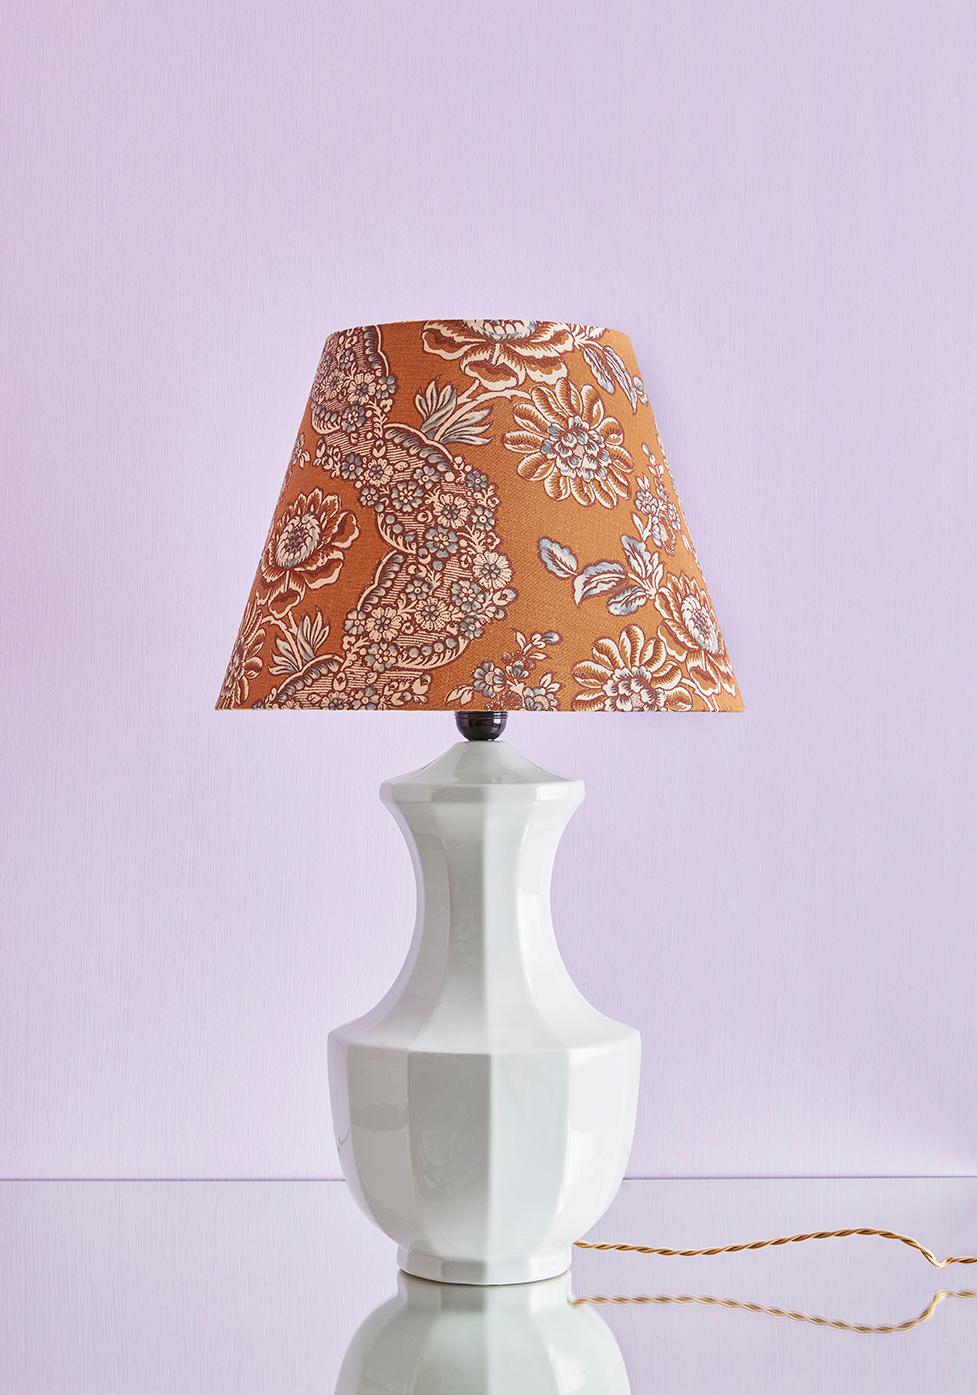 France, Vintage

Ceramic table lamp with floral, orange / brown customized shade by The Apartment.

H 68 x Ø 38 cm